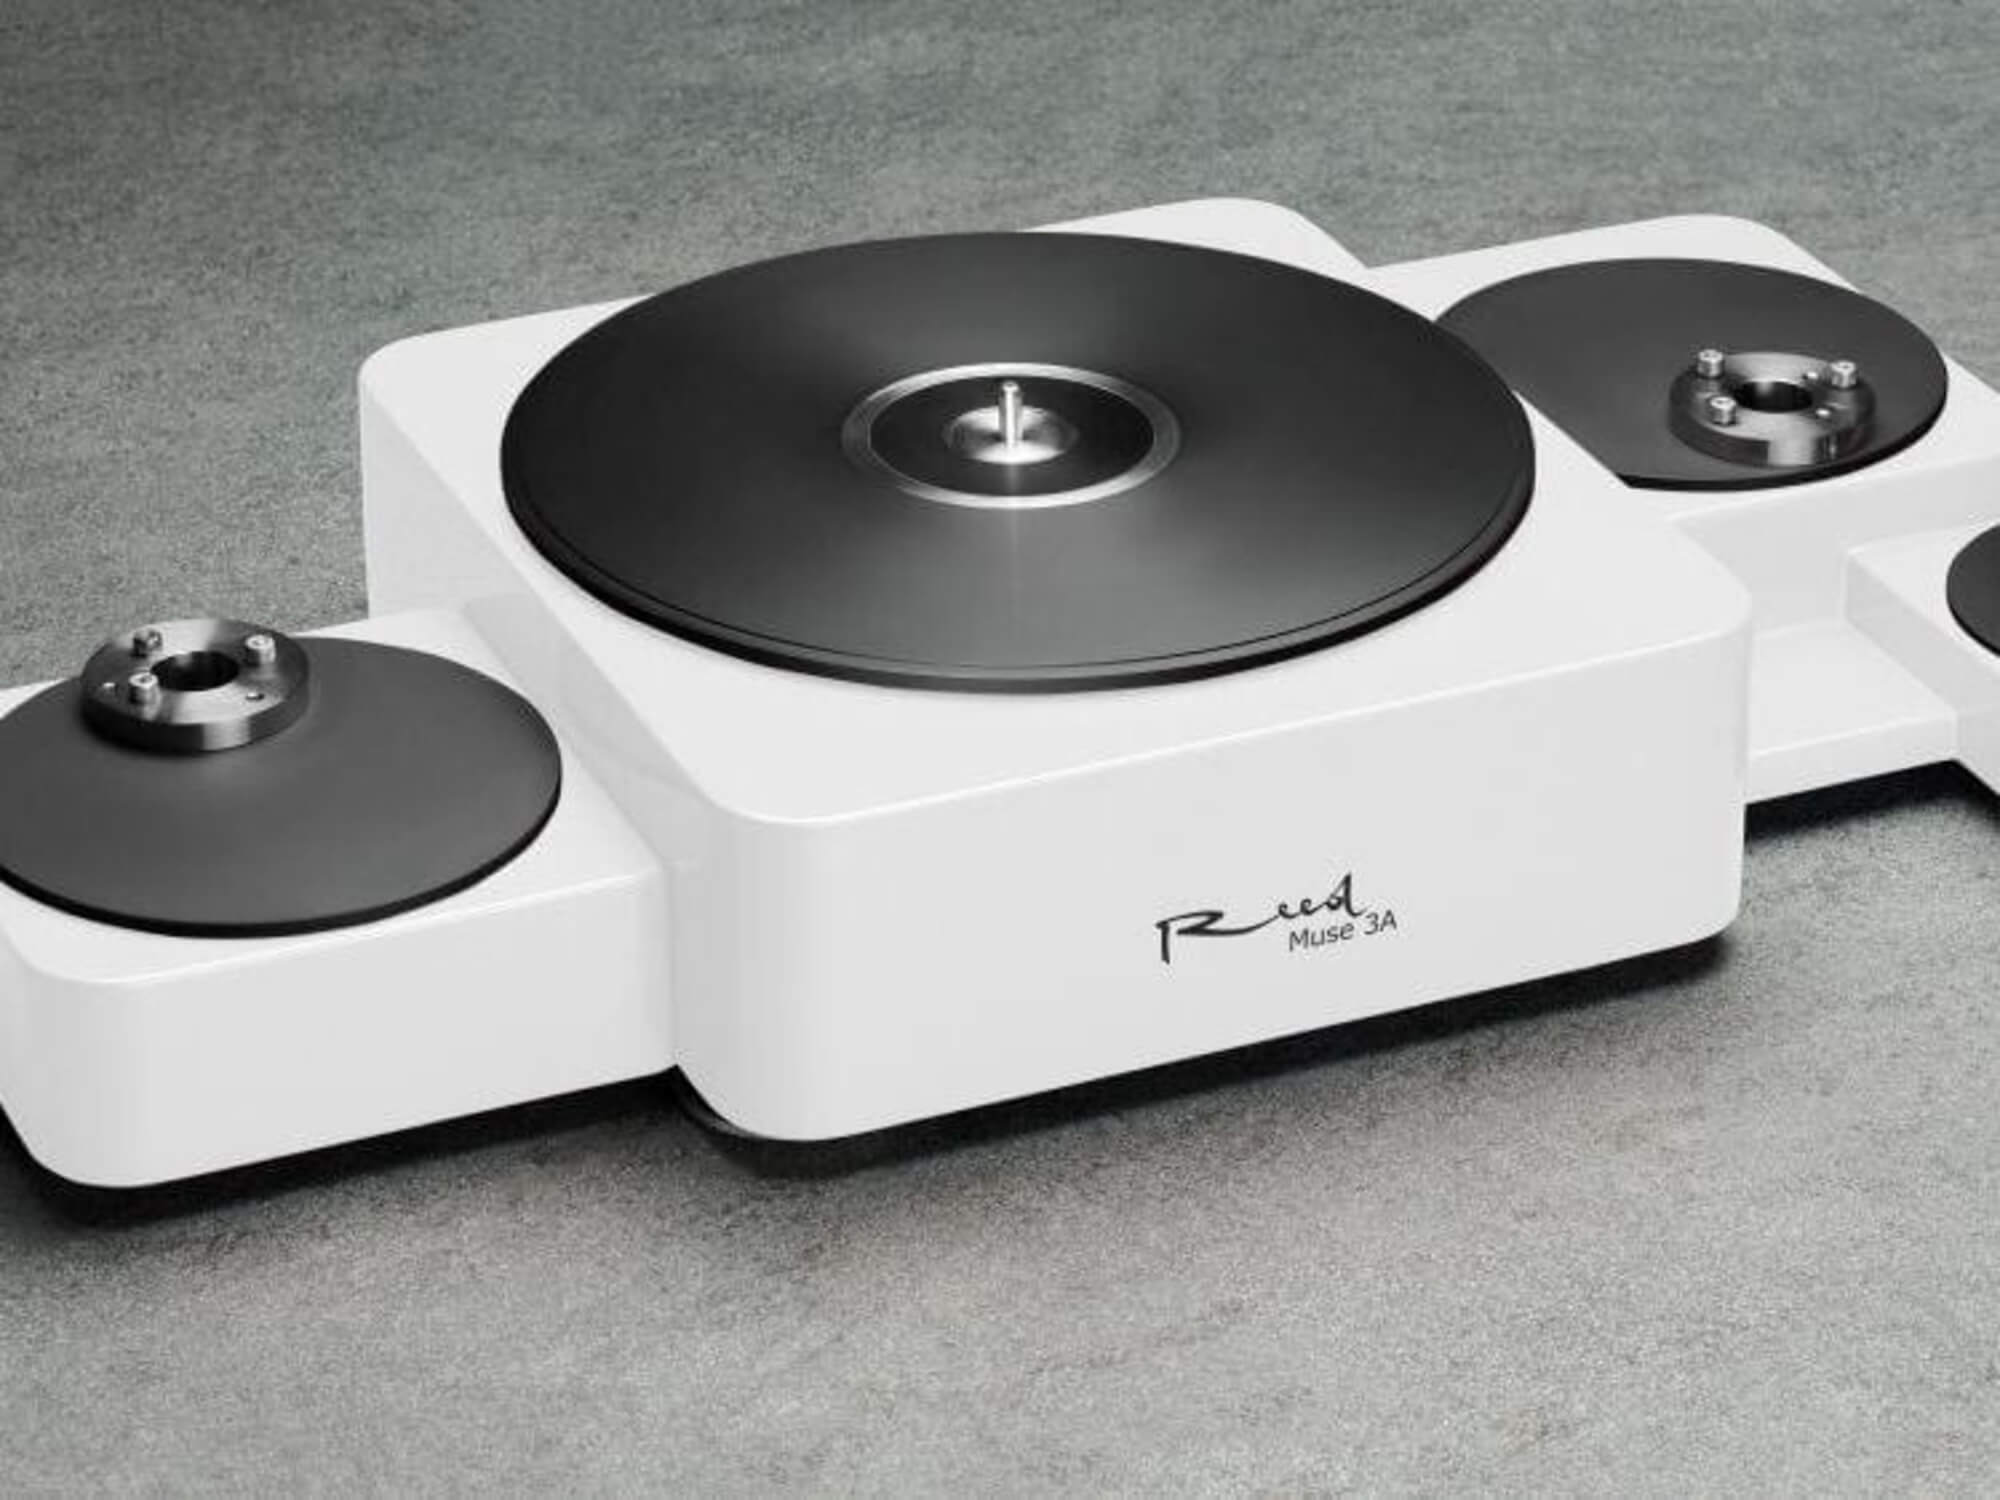 Reed Muse 3A turntable